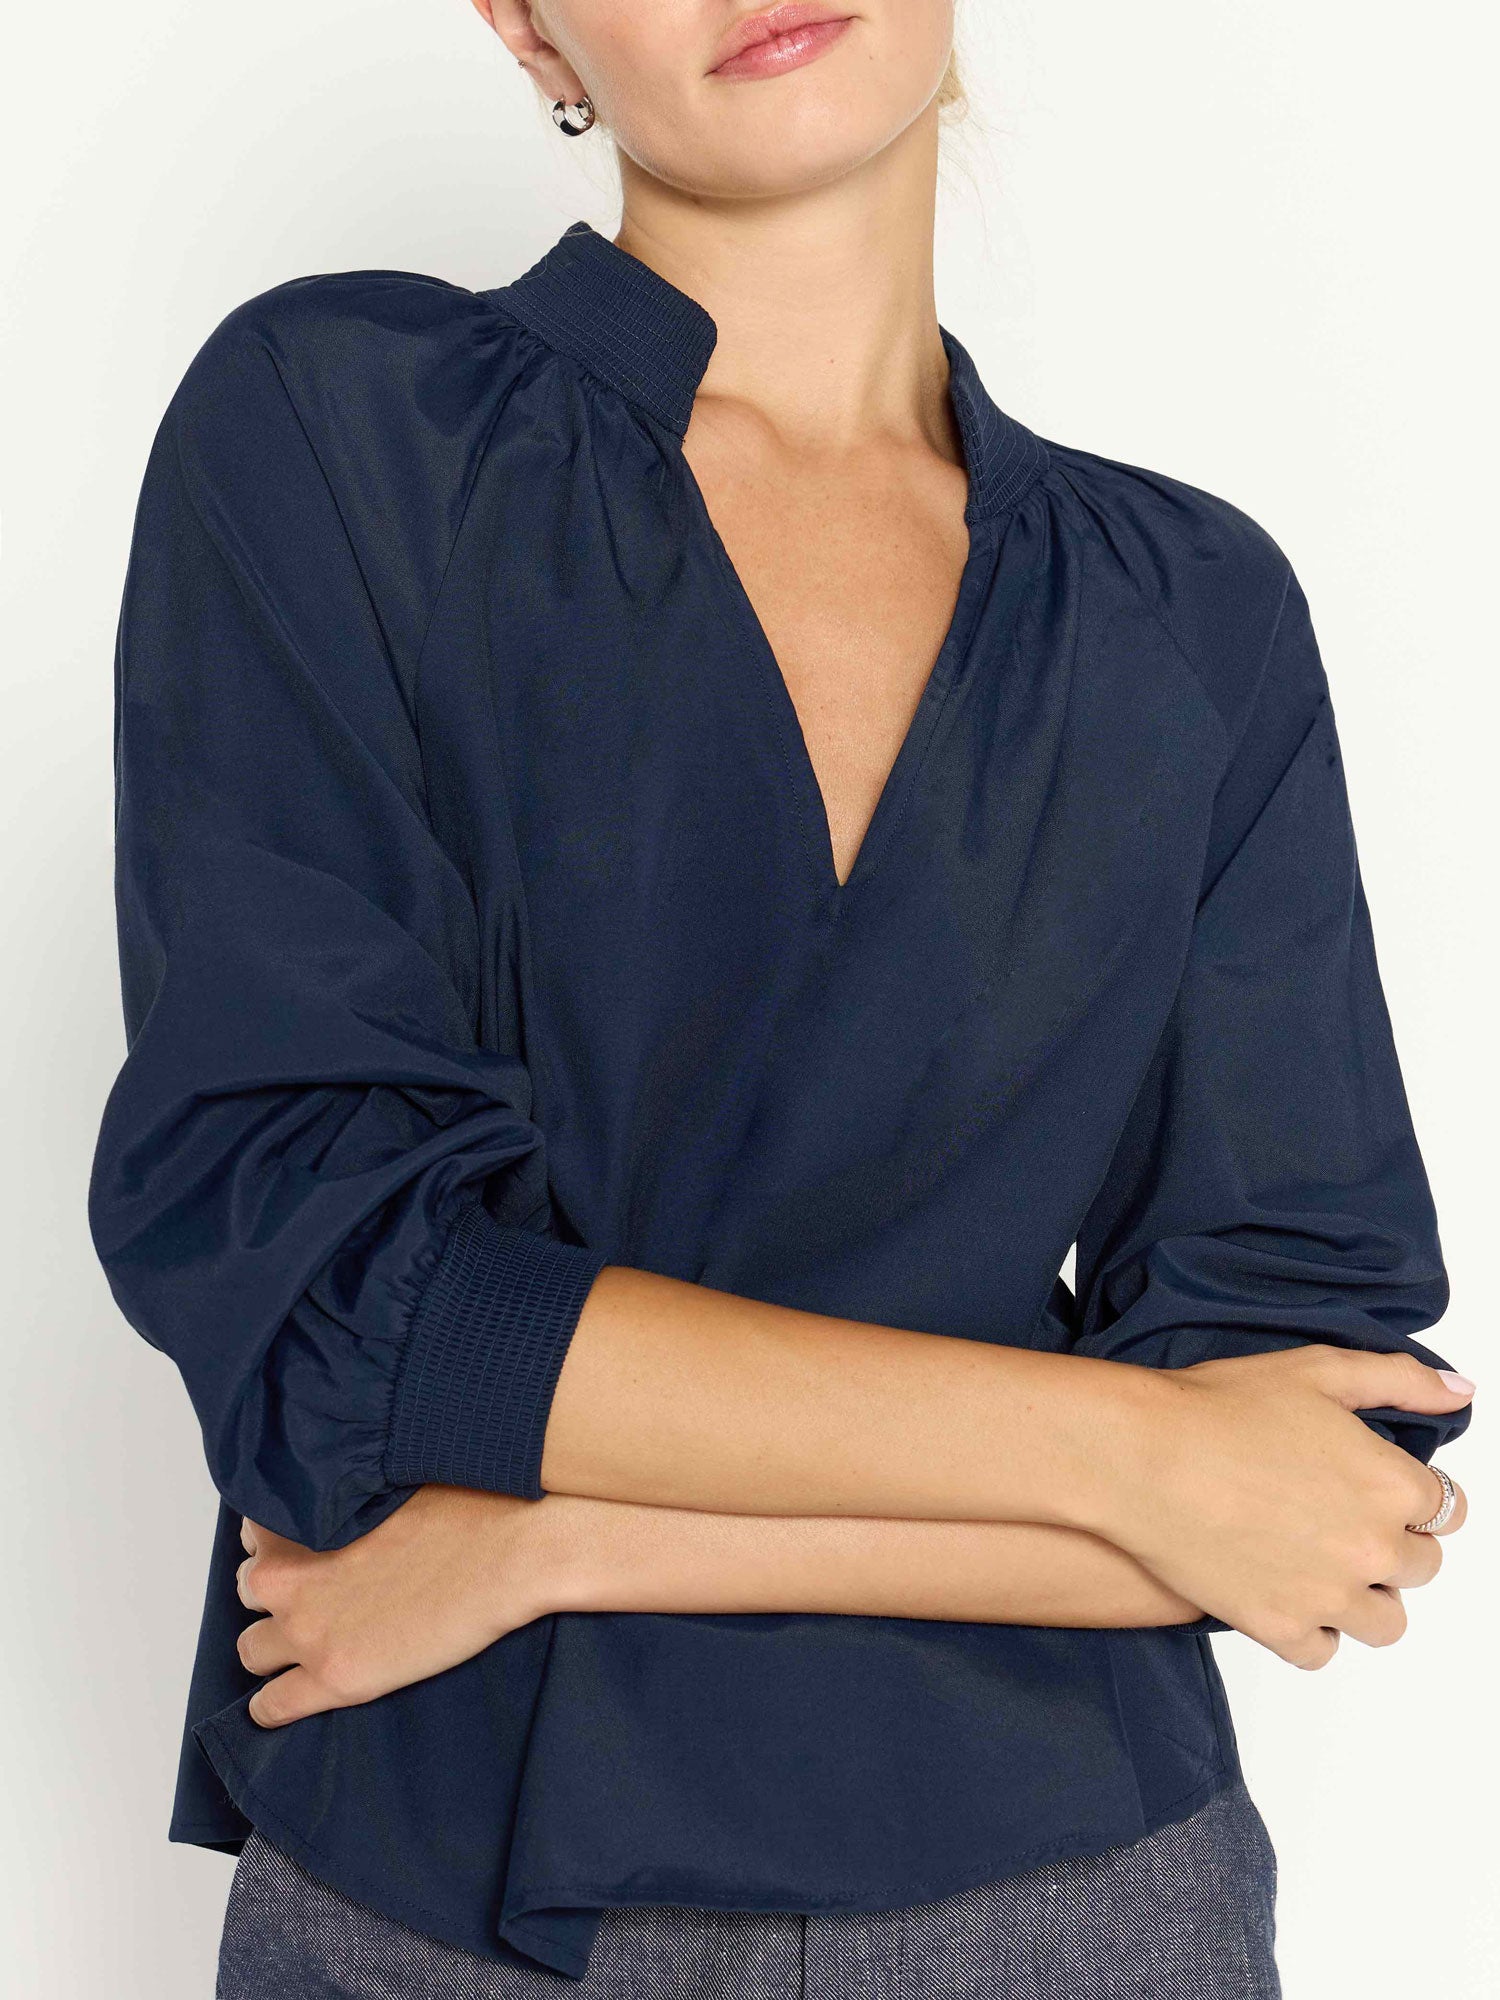 Amaia popover top navy front view 2